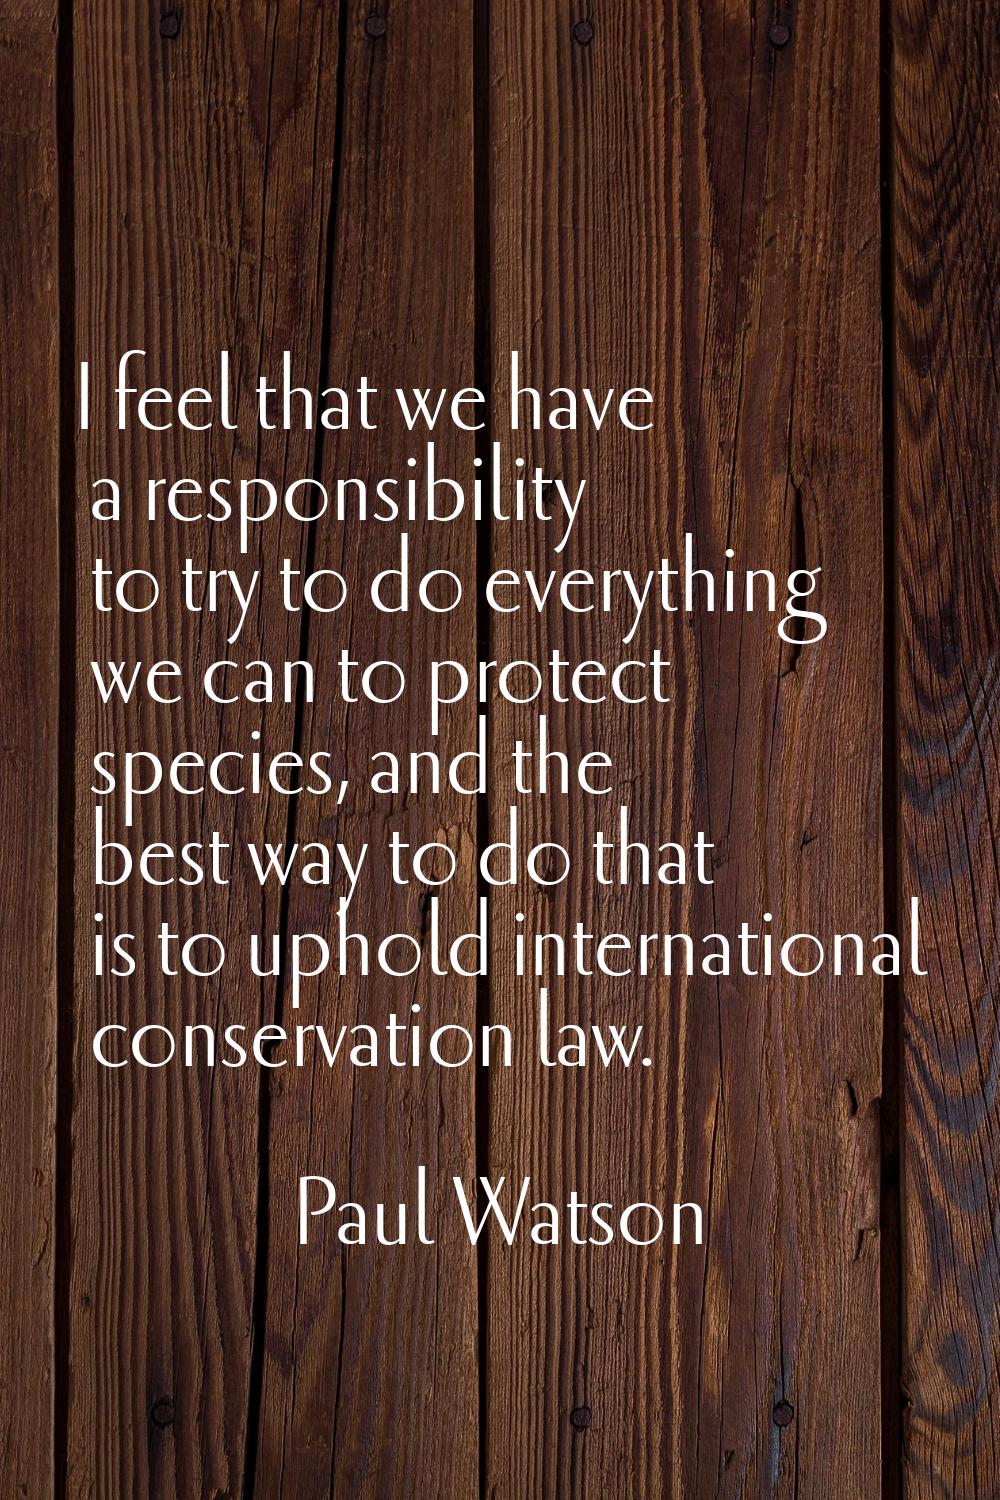 I feel that we have a responsibility to try to do everything we can to protect species, and the bes